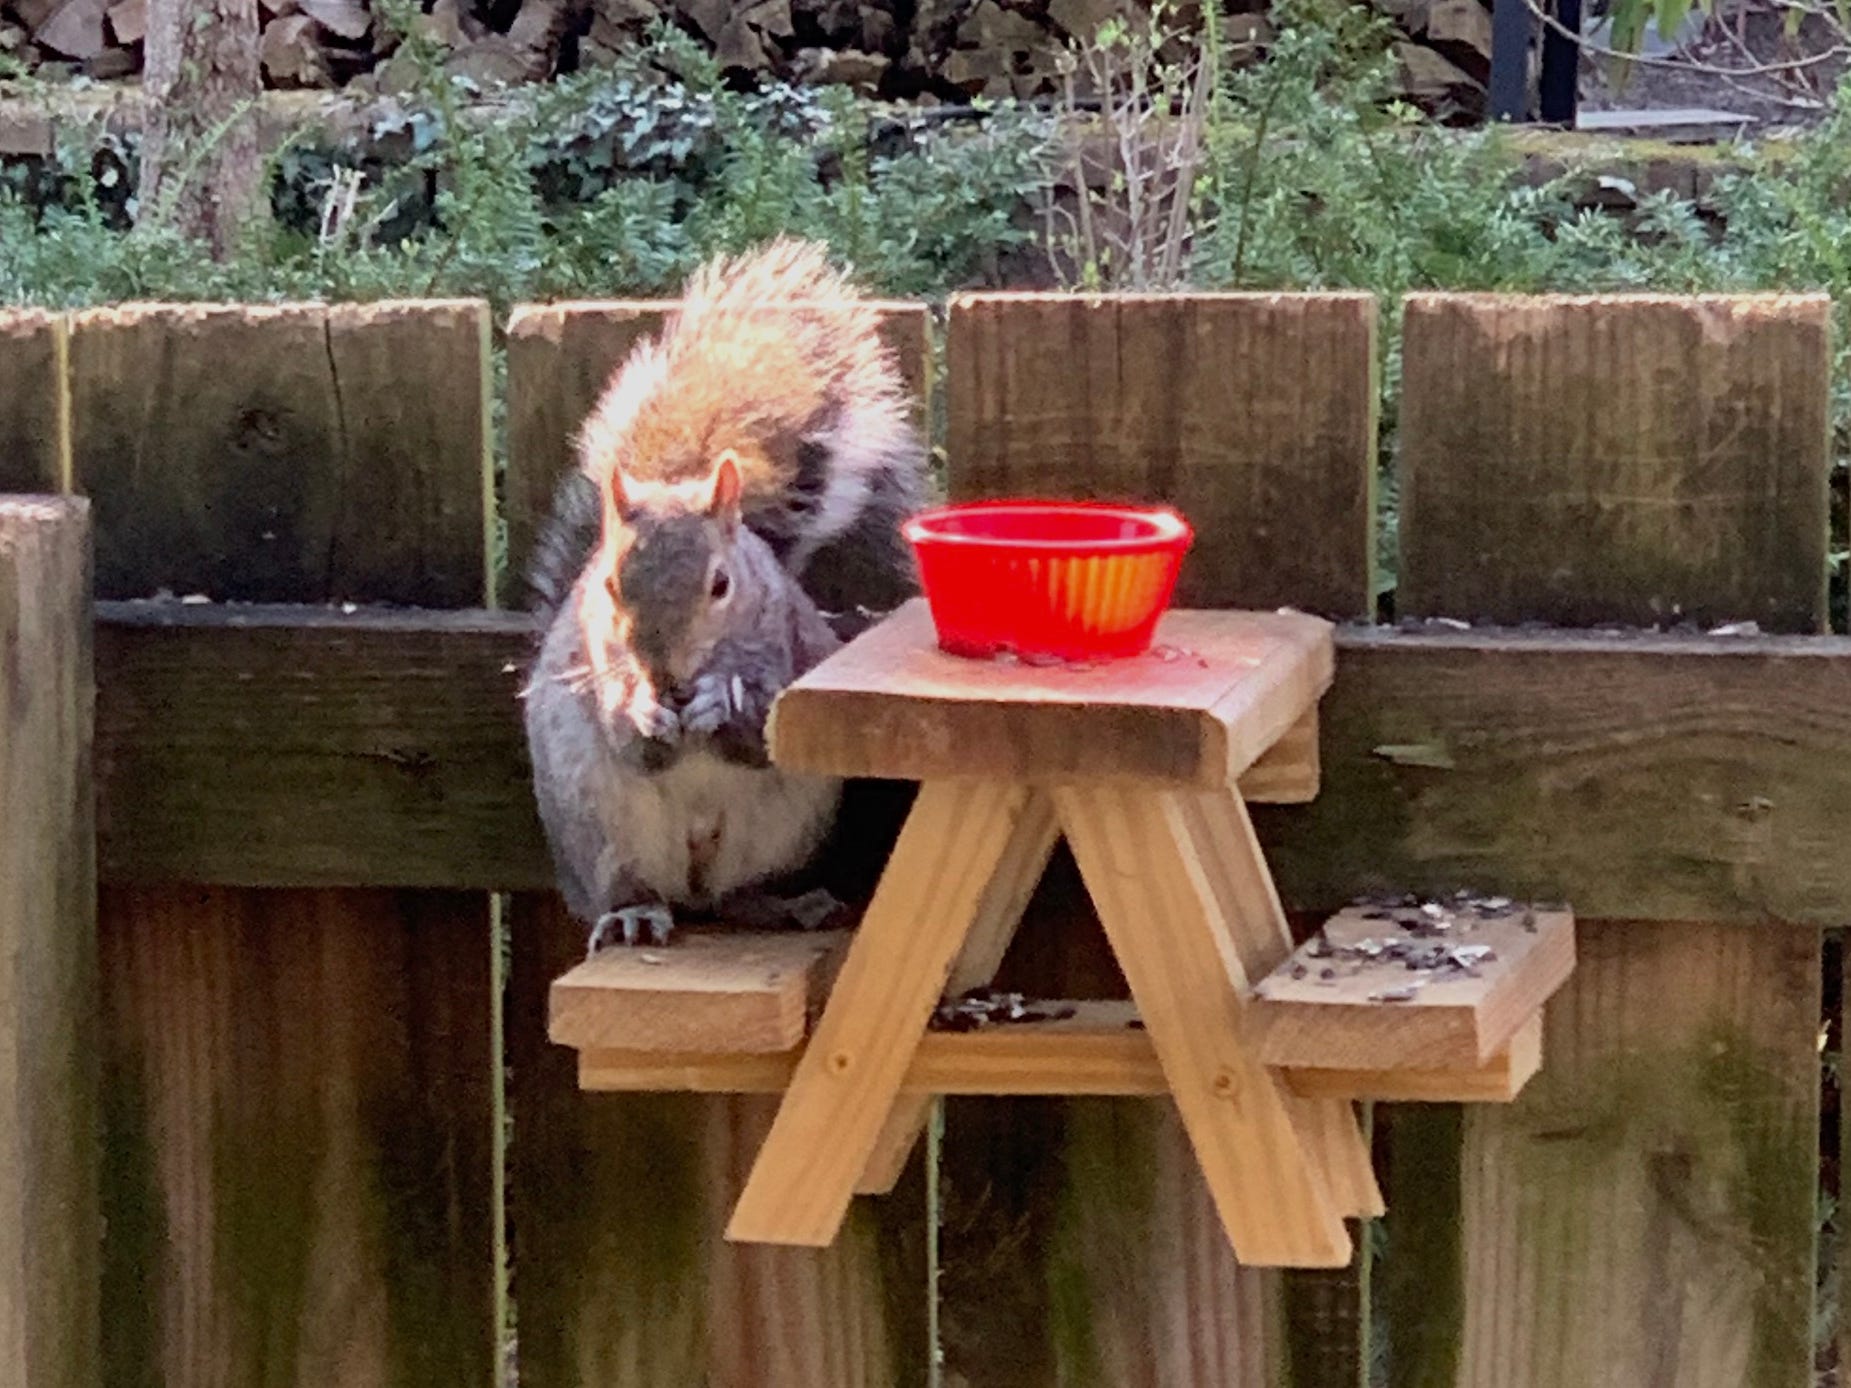 A squirrel sitting and eating at a picnic table feeder